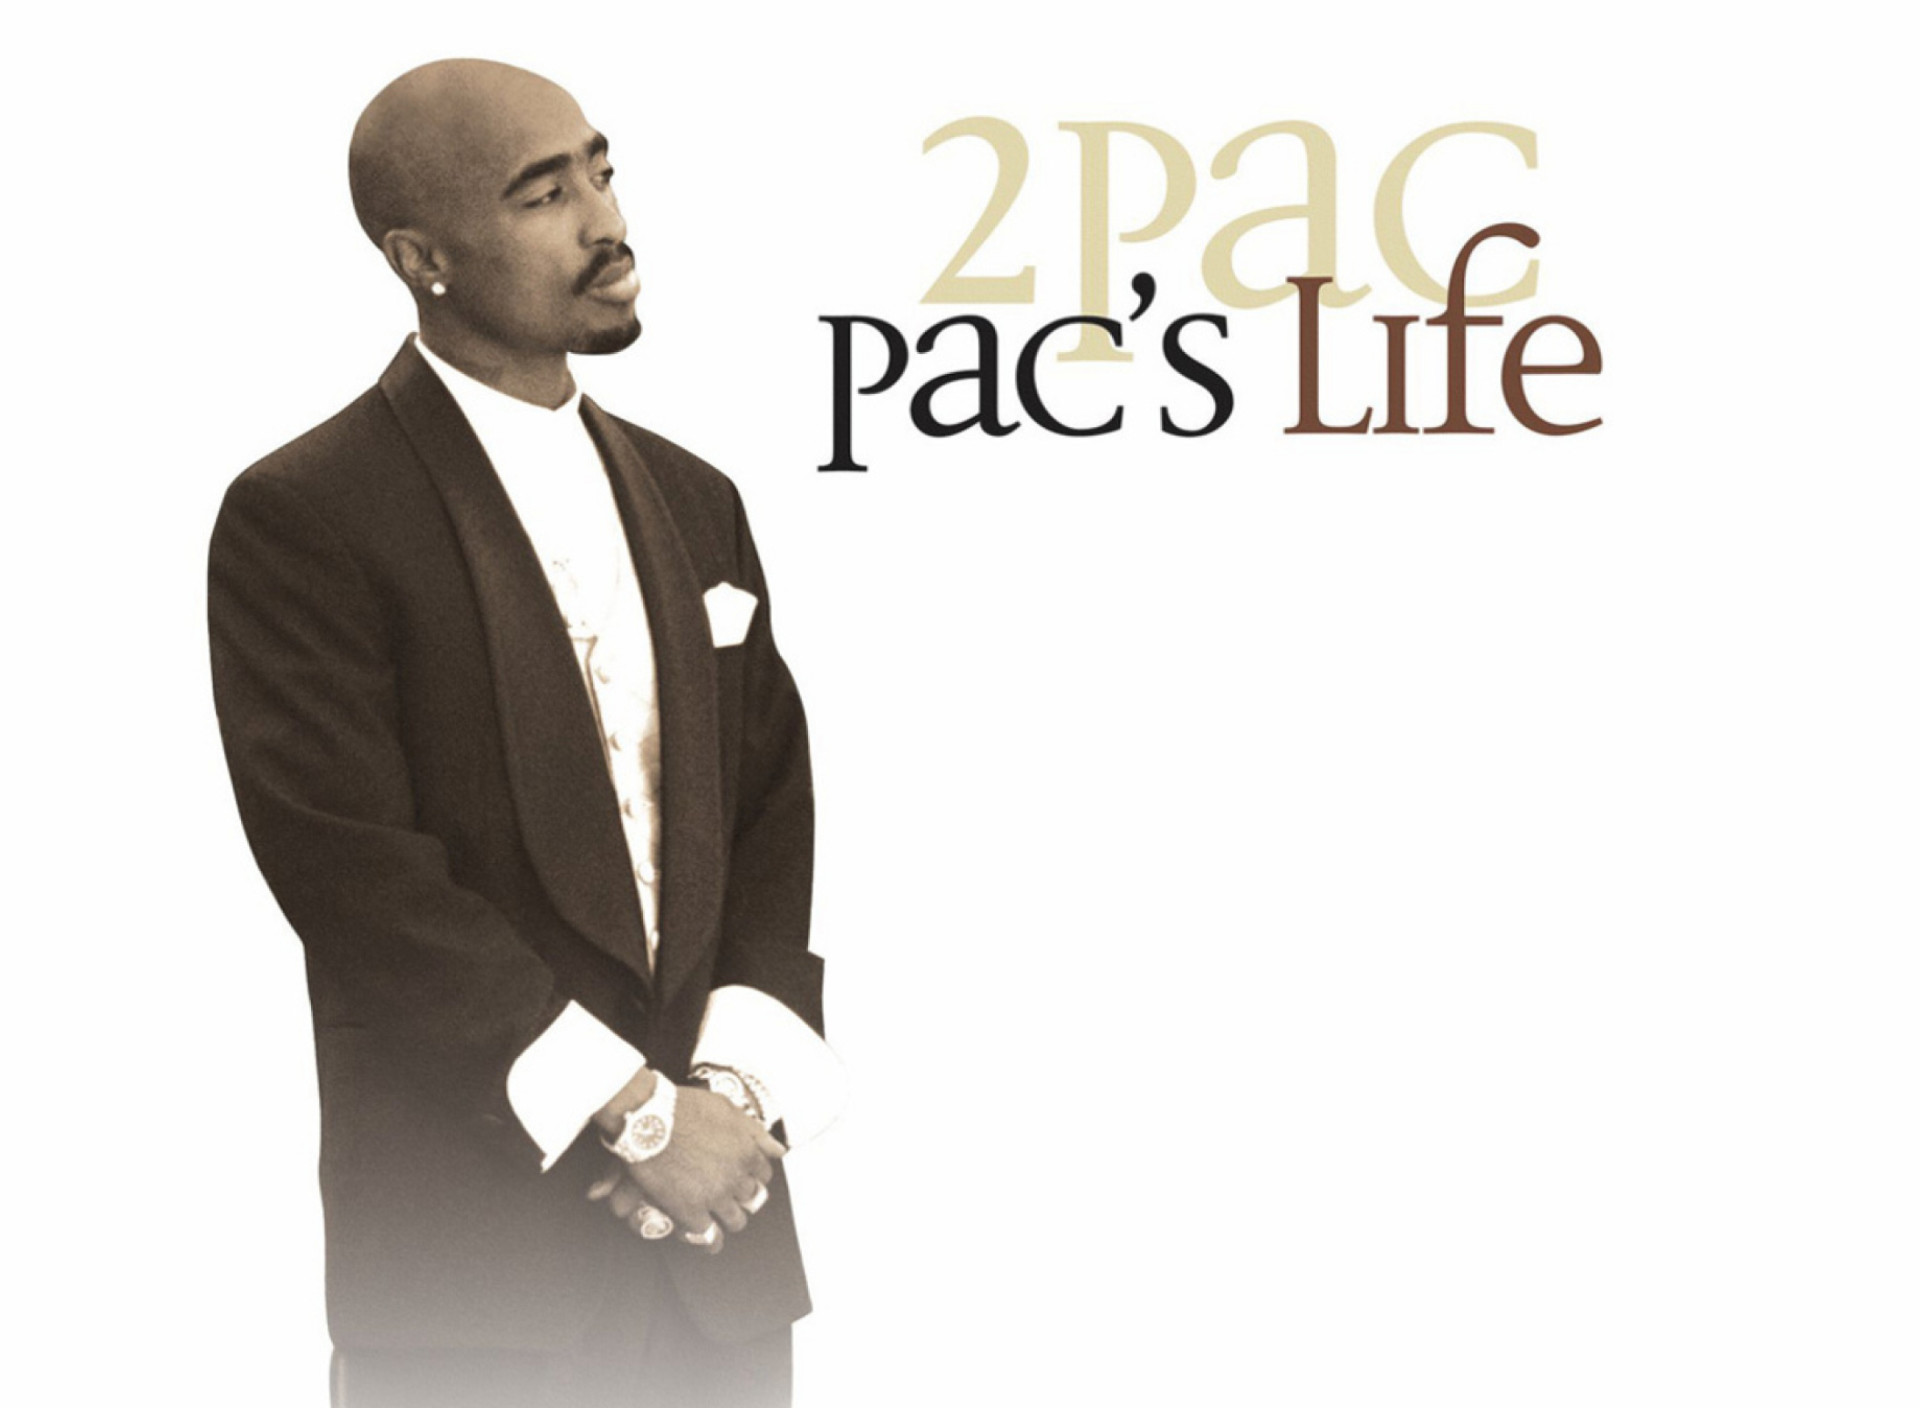 Tupac Shakur Only God Can Judge Me Rapper Hd Wallpapers - 2pac Pac's Life , HD Wallpaper & Backgrounds